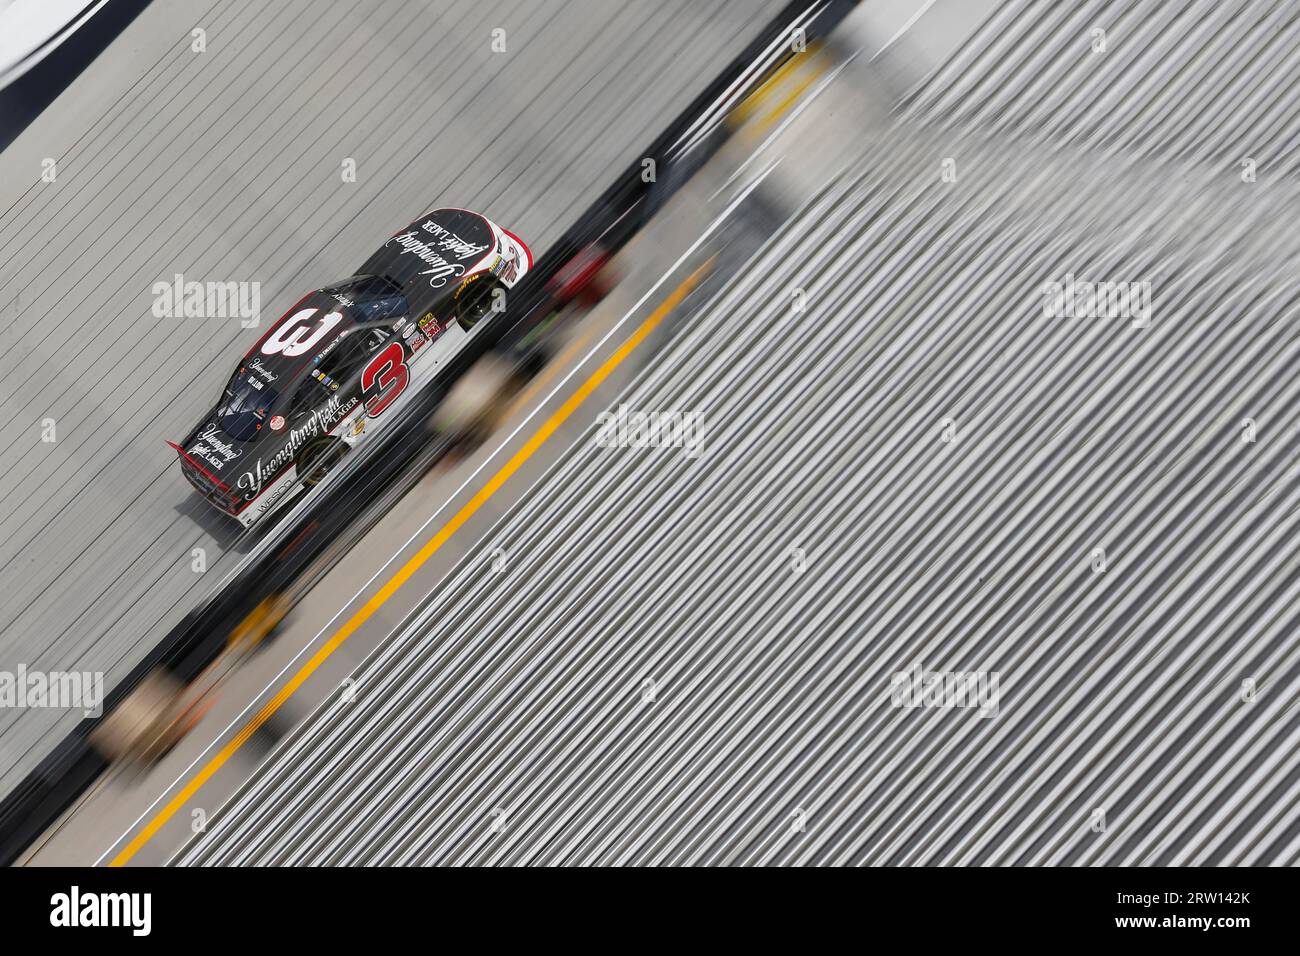 Bristol, TN, Apr 17, 2015: Ty Dillon (3) brings his car through the backstretch during a practice session for the Drive to Stop Diabetes 300 at Stock Photo